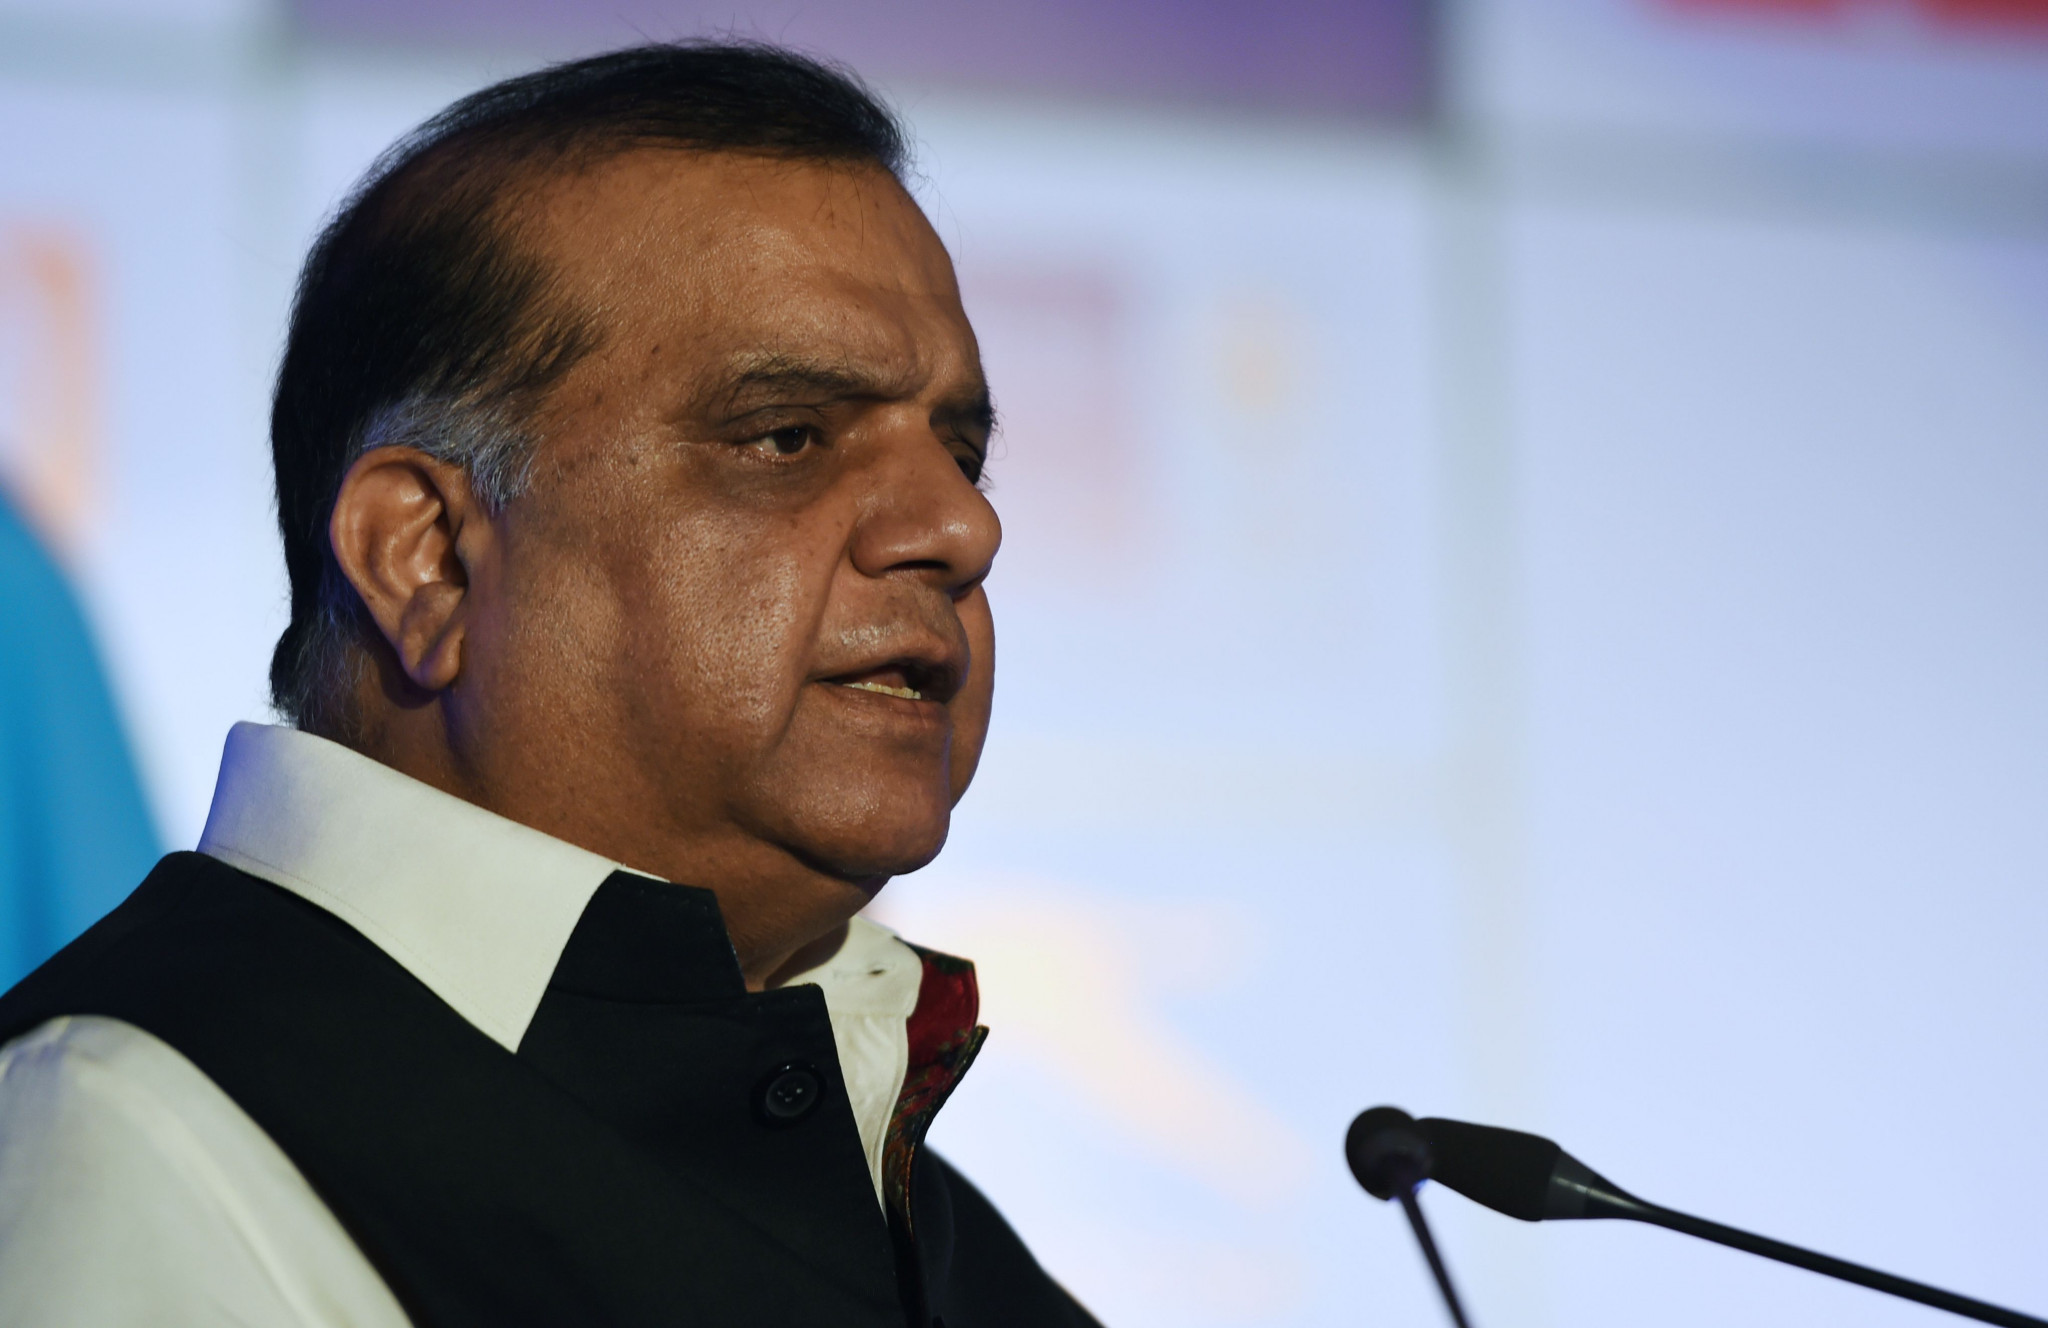 The International Hockey Federation has issued a written warning to its President Narinder Batra and fined him after he criticised police in Britain last June ©Getty Images